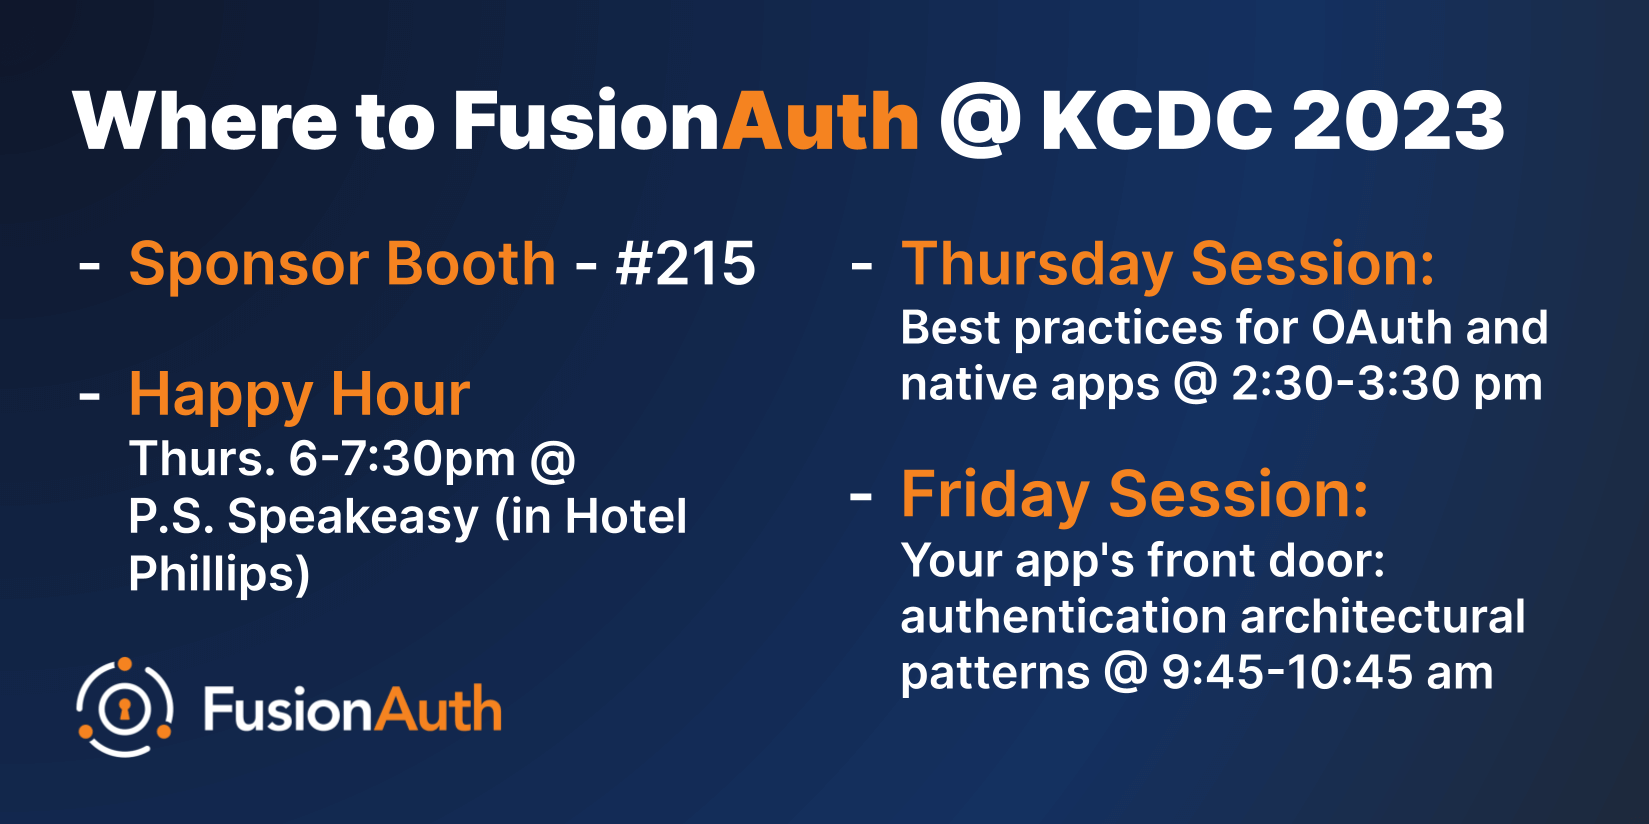 Where to find the FusionAuth team at KCDC 2023.